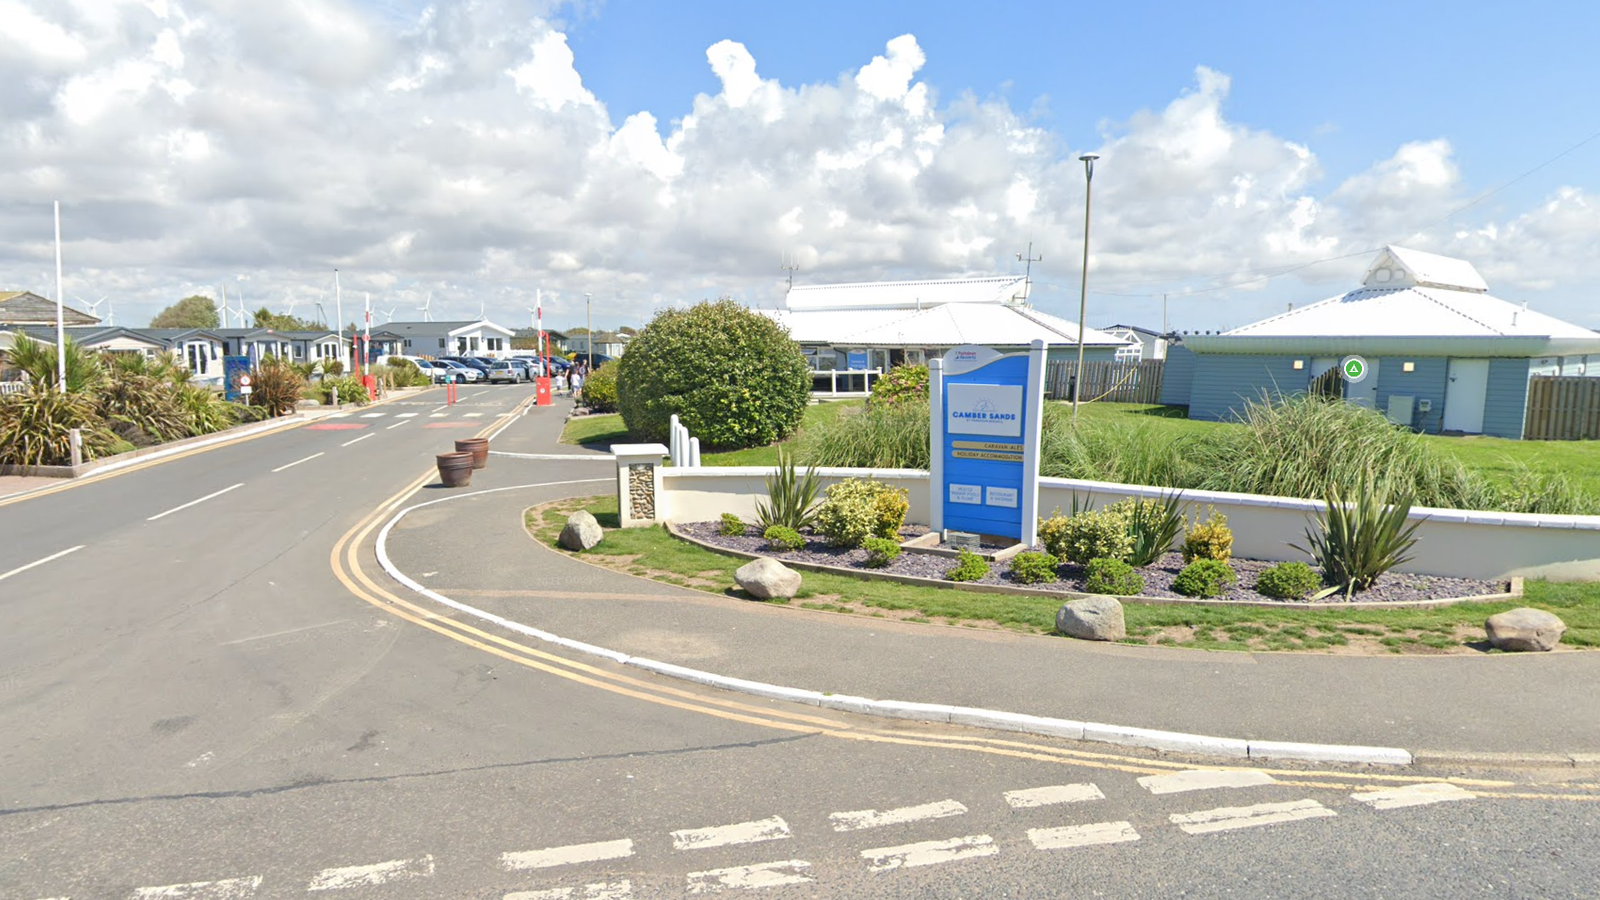 six-people-arrested-after-man-dies-at-holiday-park-in-camber-sands